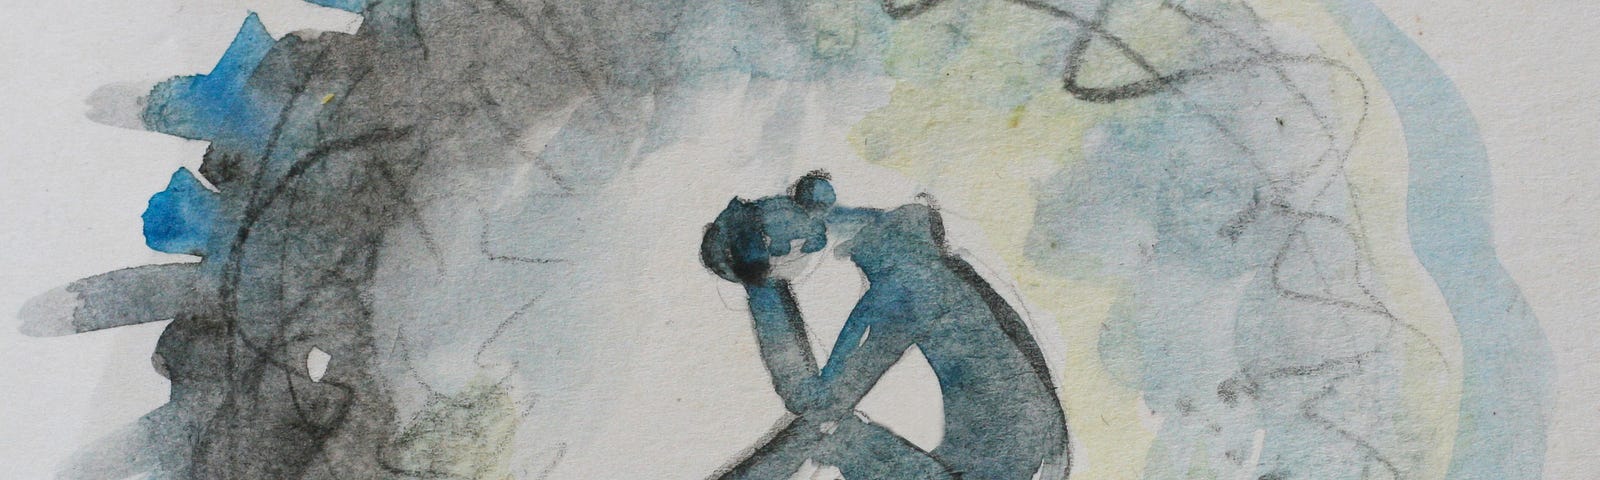 watercolor painting of a gray abstract woman surrounded by a blue, black, and gray morass